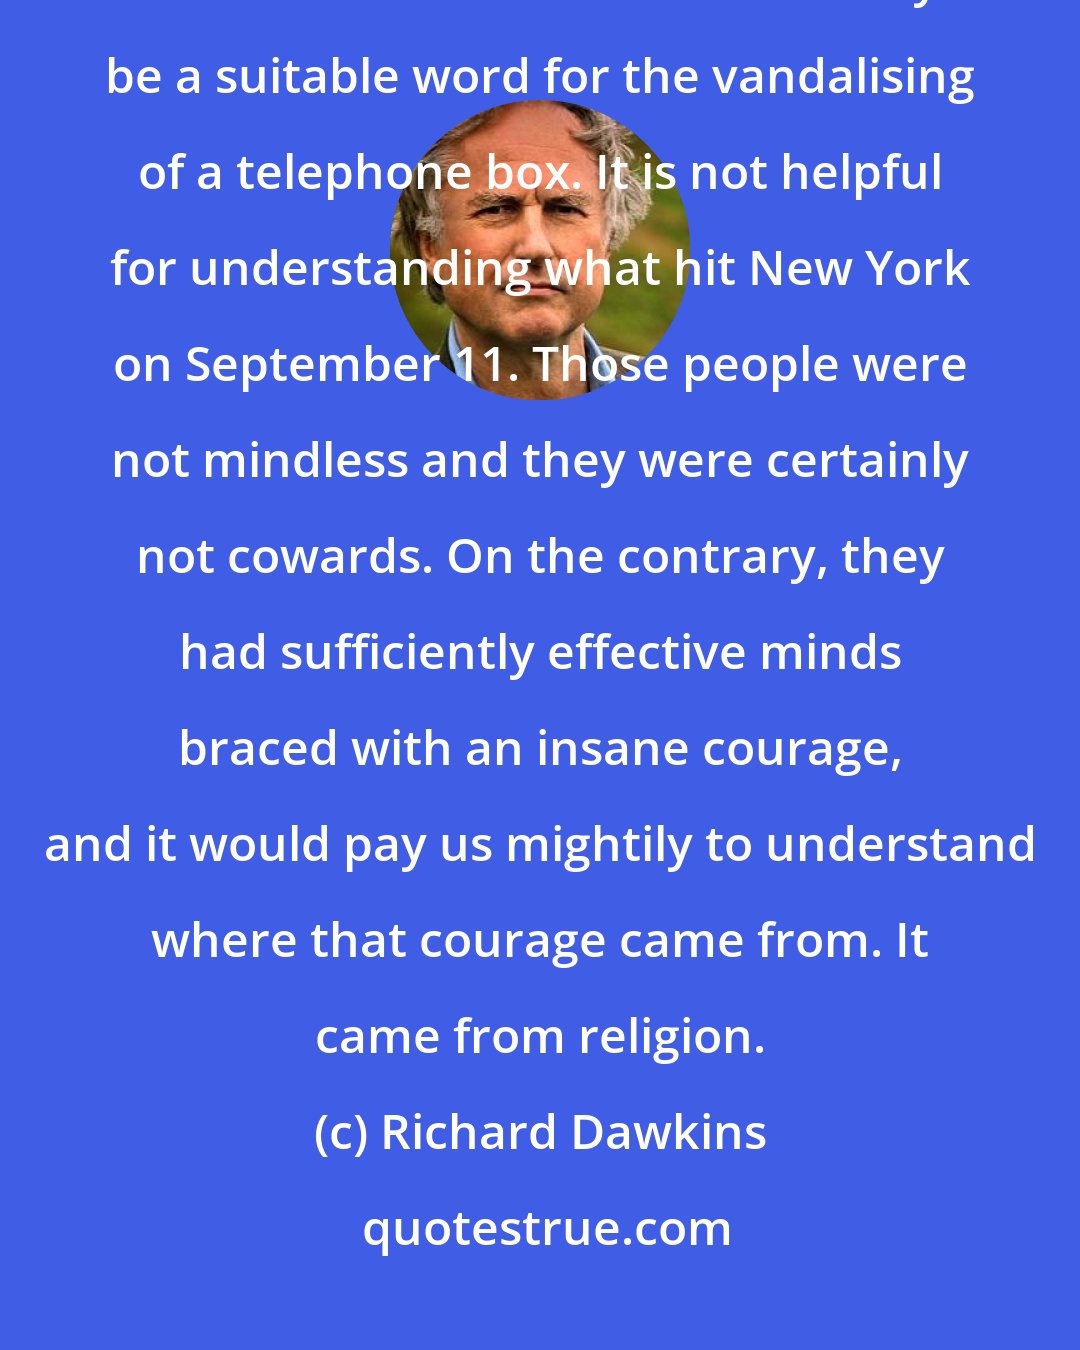 Richard Dawkins: Our leaders have described the recent atrocity with the customary cliche: mindless cowardice. Mindless may be a suitable word for the vandalising of a telephone box. It is not helpful for understanding what hit New York on September 11. Those people were not mindless and they were certainly not cowards. On the contrary, they had sufficiently effective minds braced with an insane courage, and it would pay us mightily to understand where that courage came from. It came from religion.